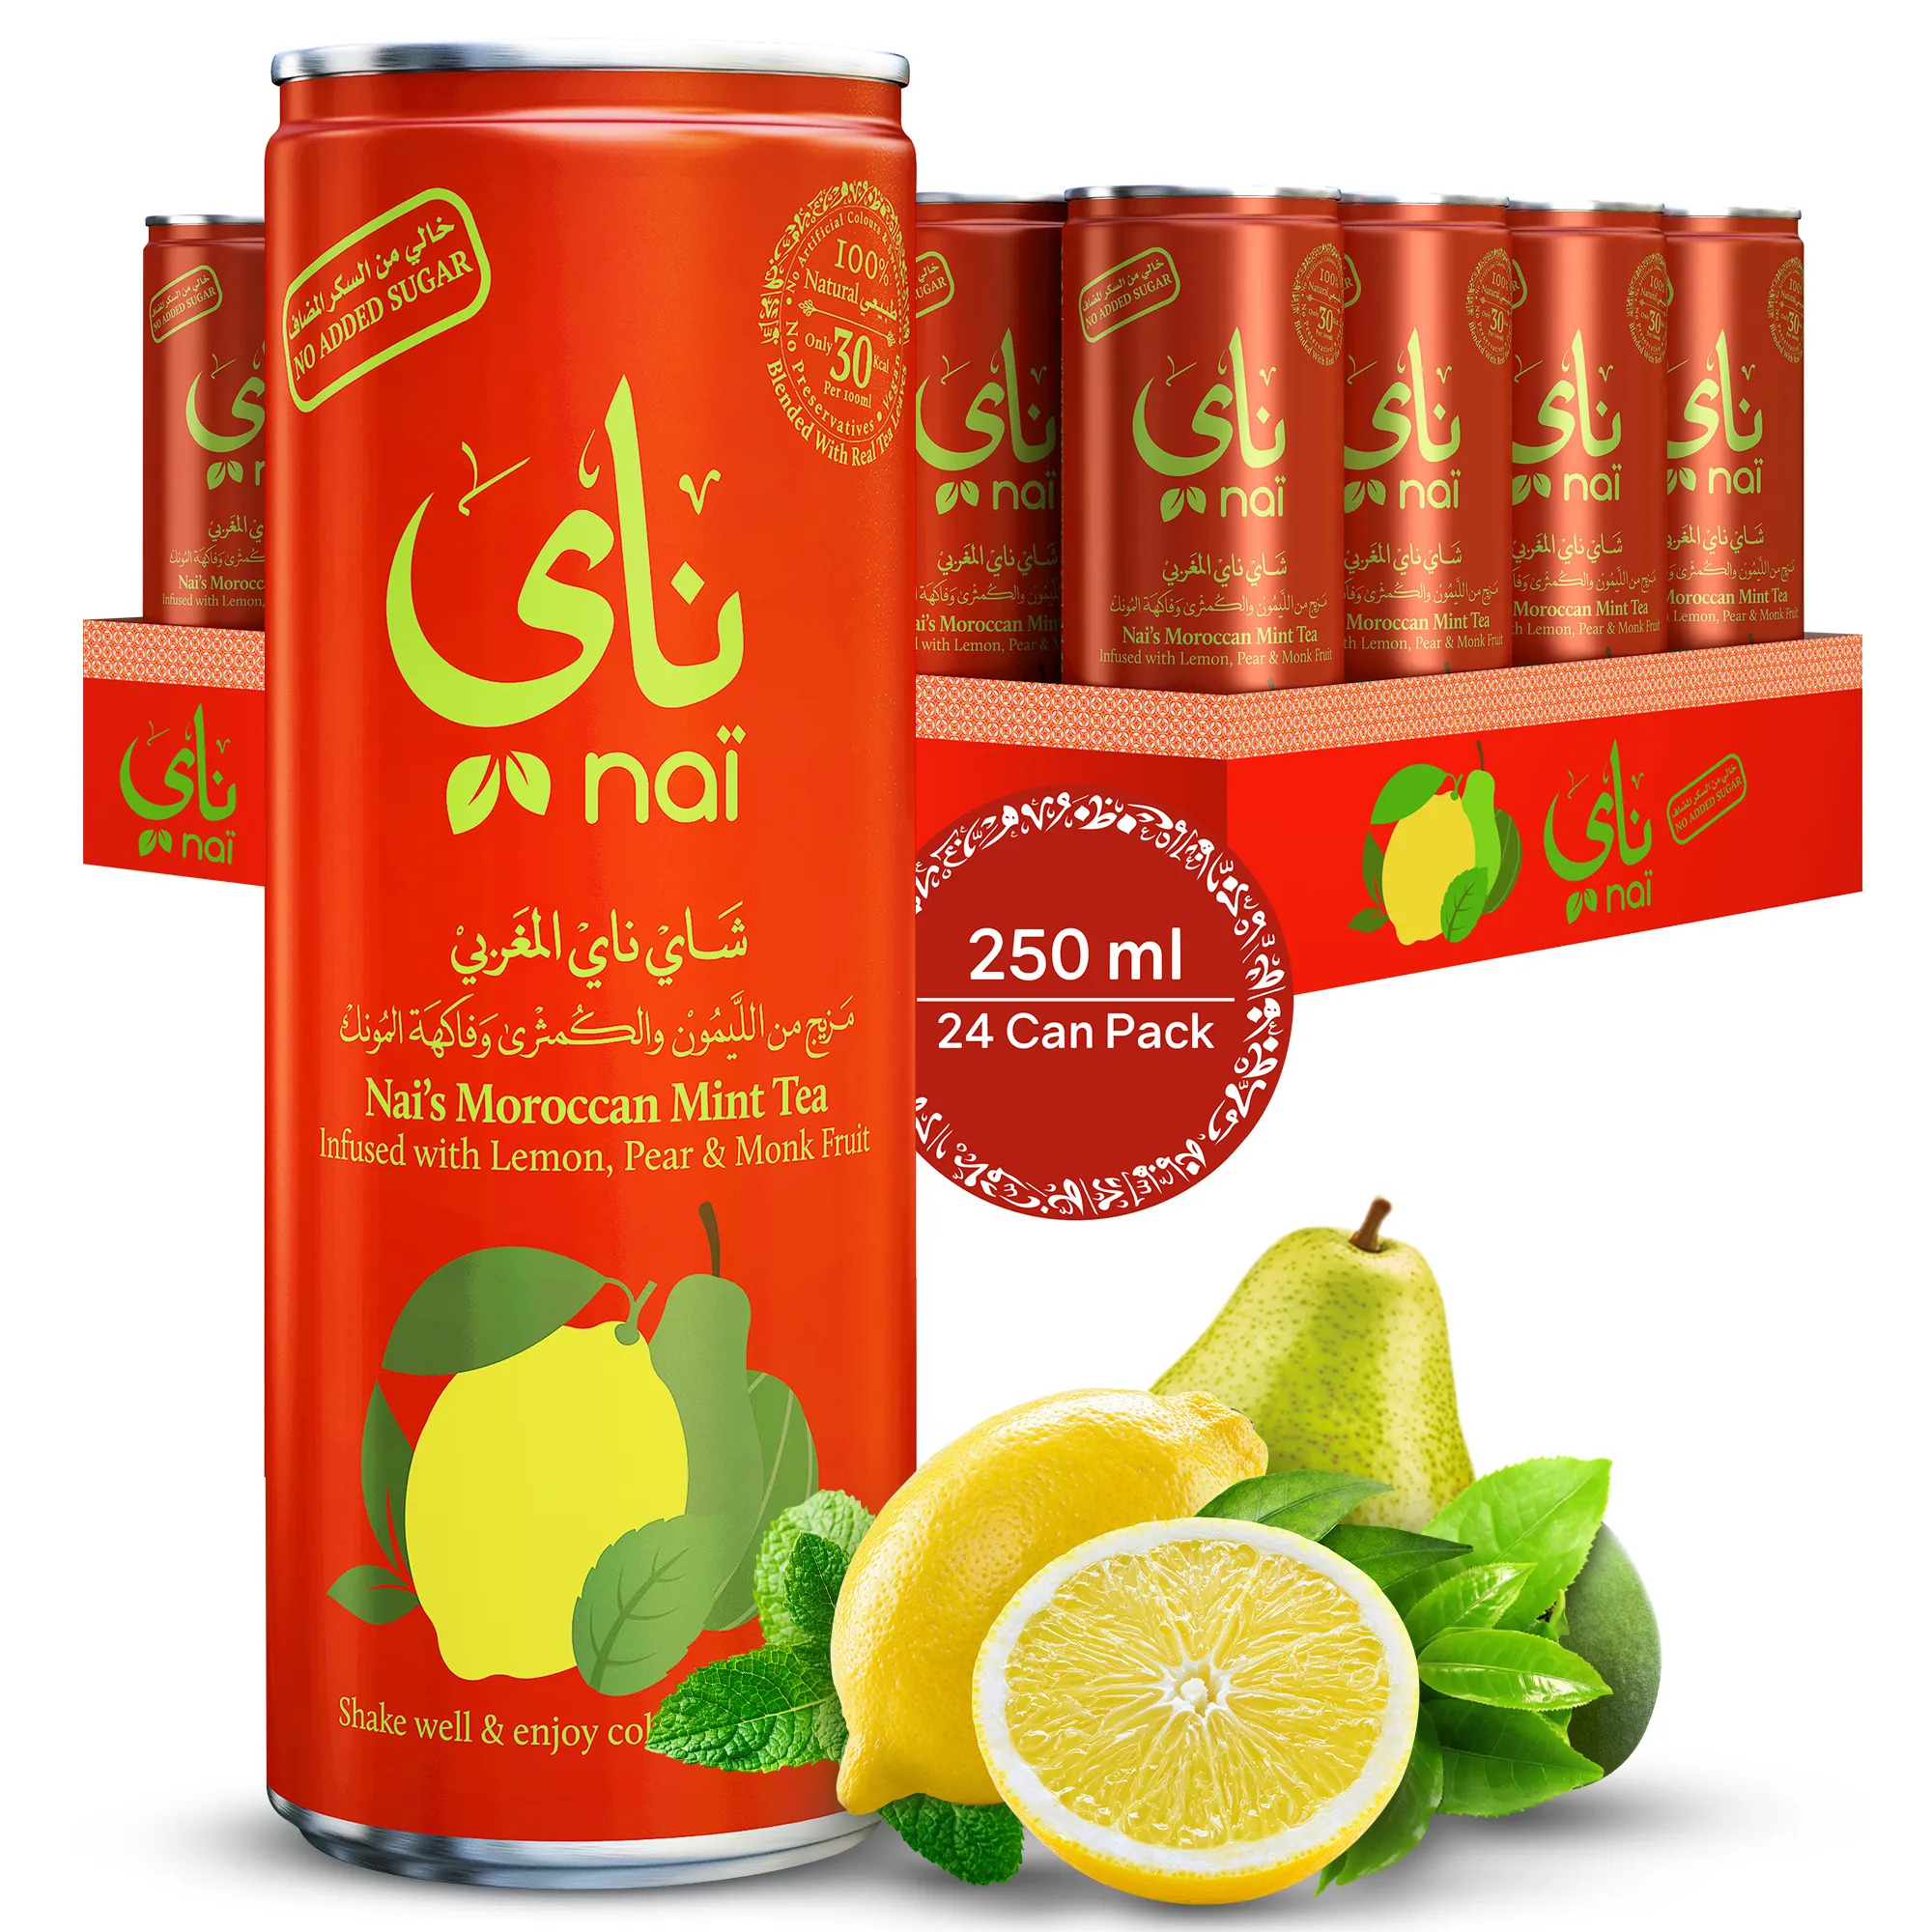 Nai s Moroccan Mint Tea, 100 Natural, Ready-to-Drink, 250ml Can, 24 pack